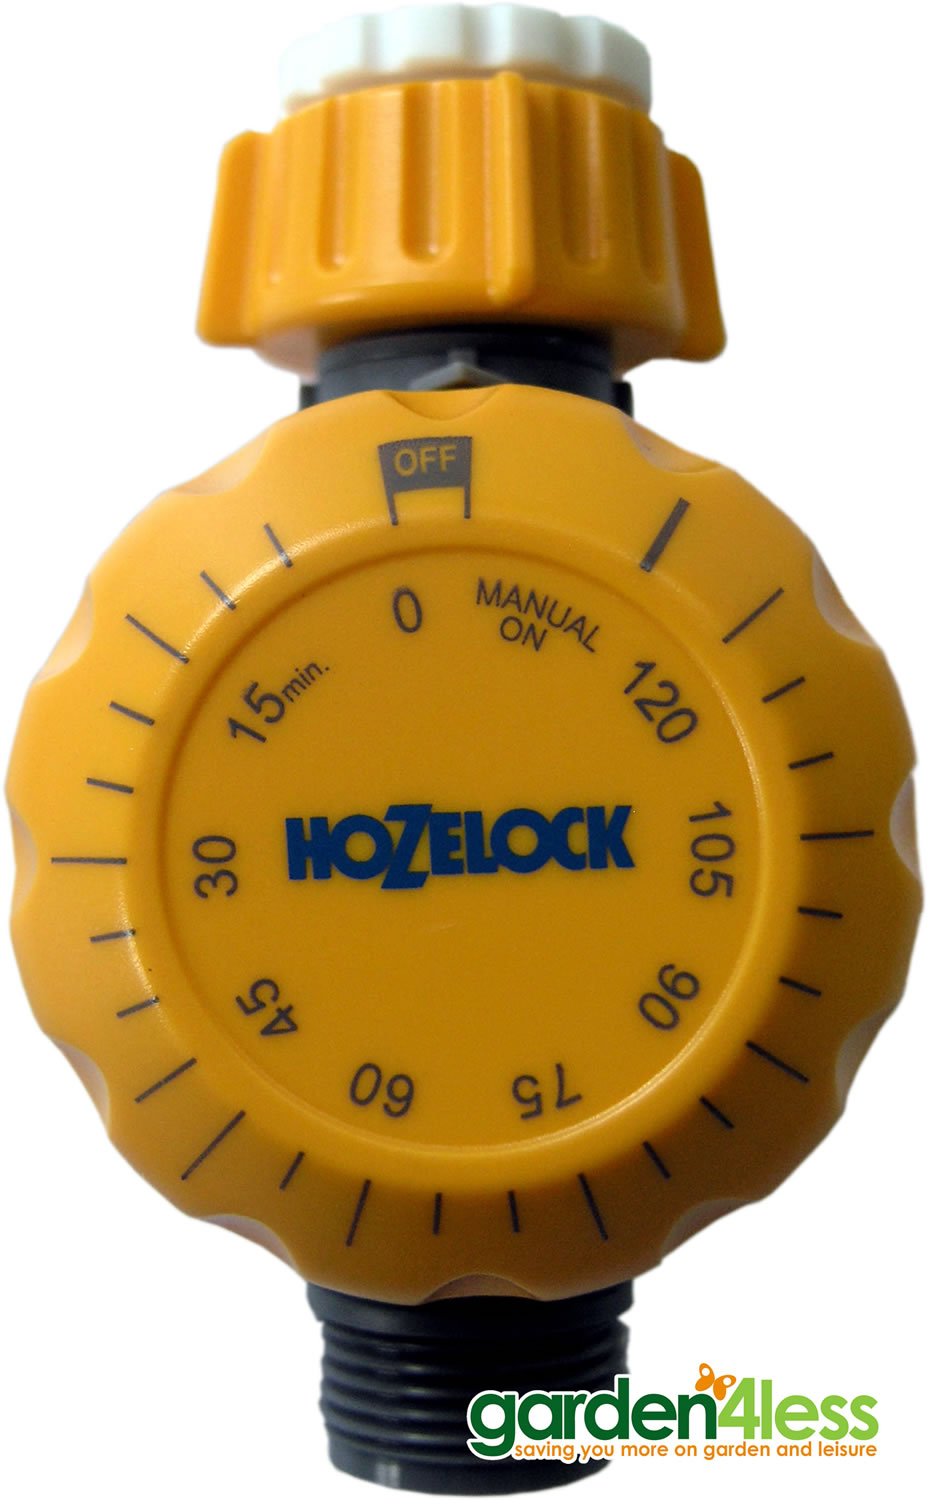 Extra image of Hozelock 15 Pot Watering Kit with Mechanical Timer